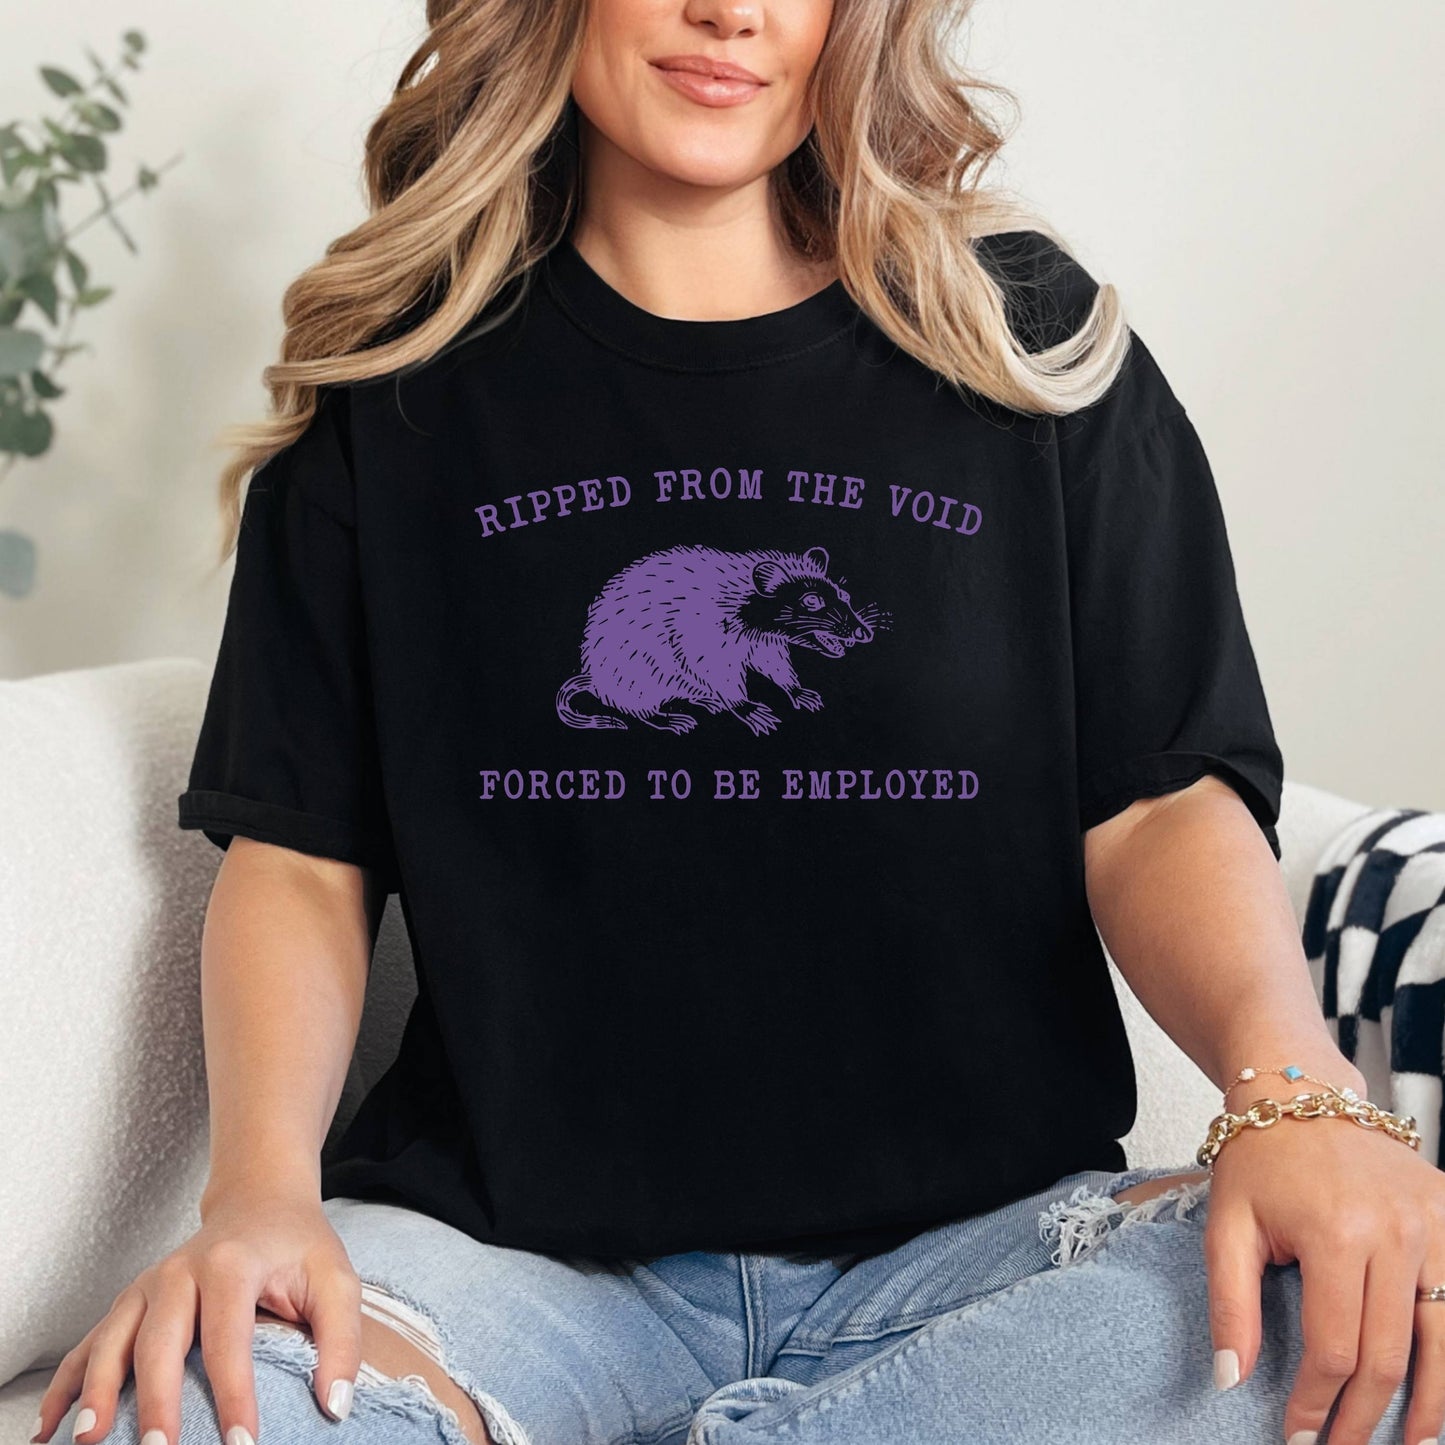 Ripped from the Void, Forced to be Employed, Funny Rat T-shirt